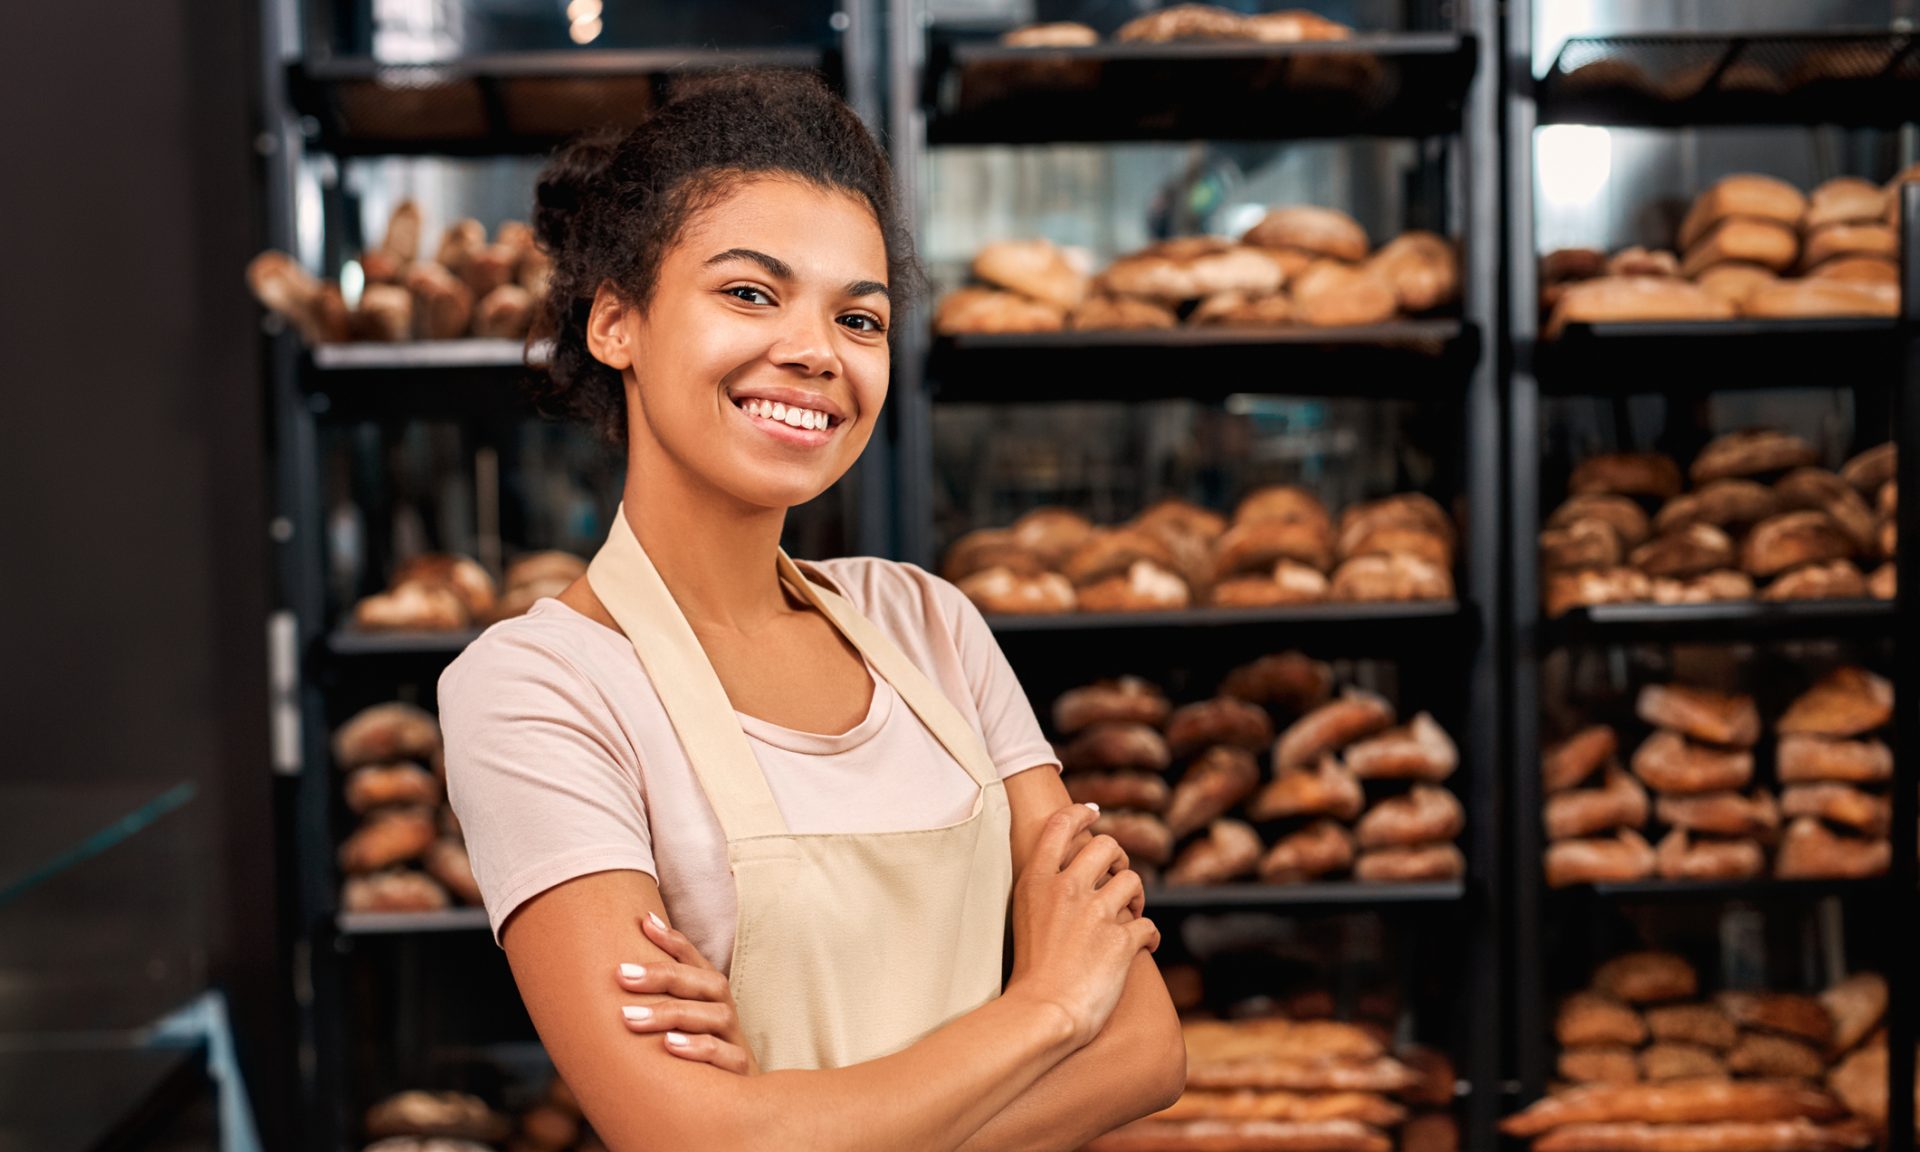 35 Small-Town Business Ideas That Every Community Needs - NerdWallet